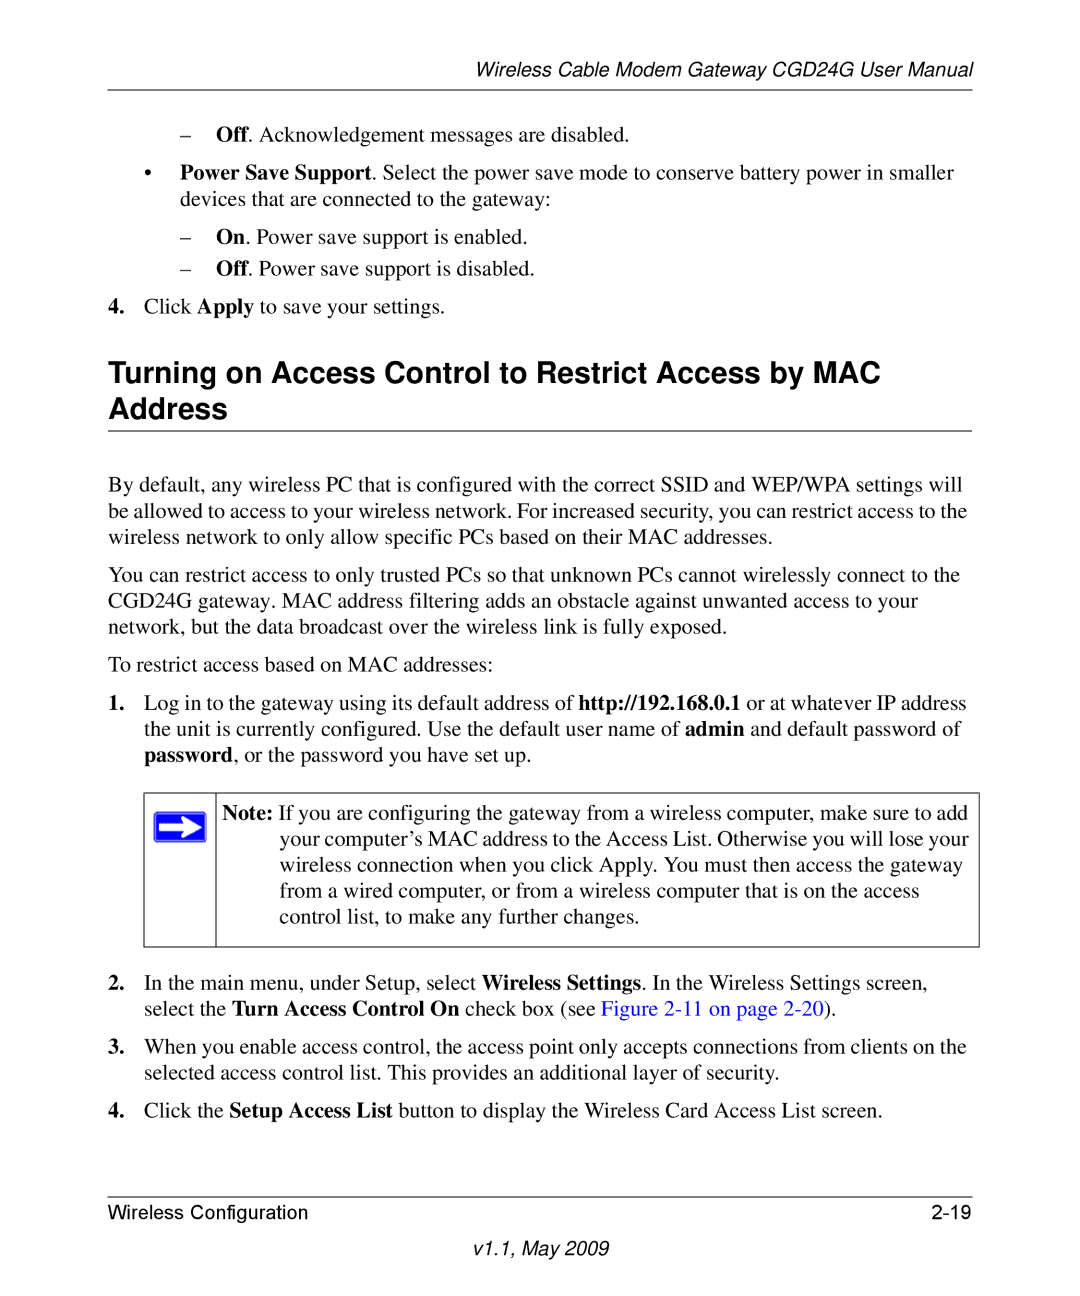 Gateway CGD24G user manual Turning on Access Control to Restrict Access by MAC Address 